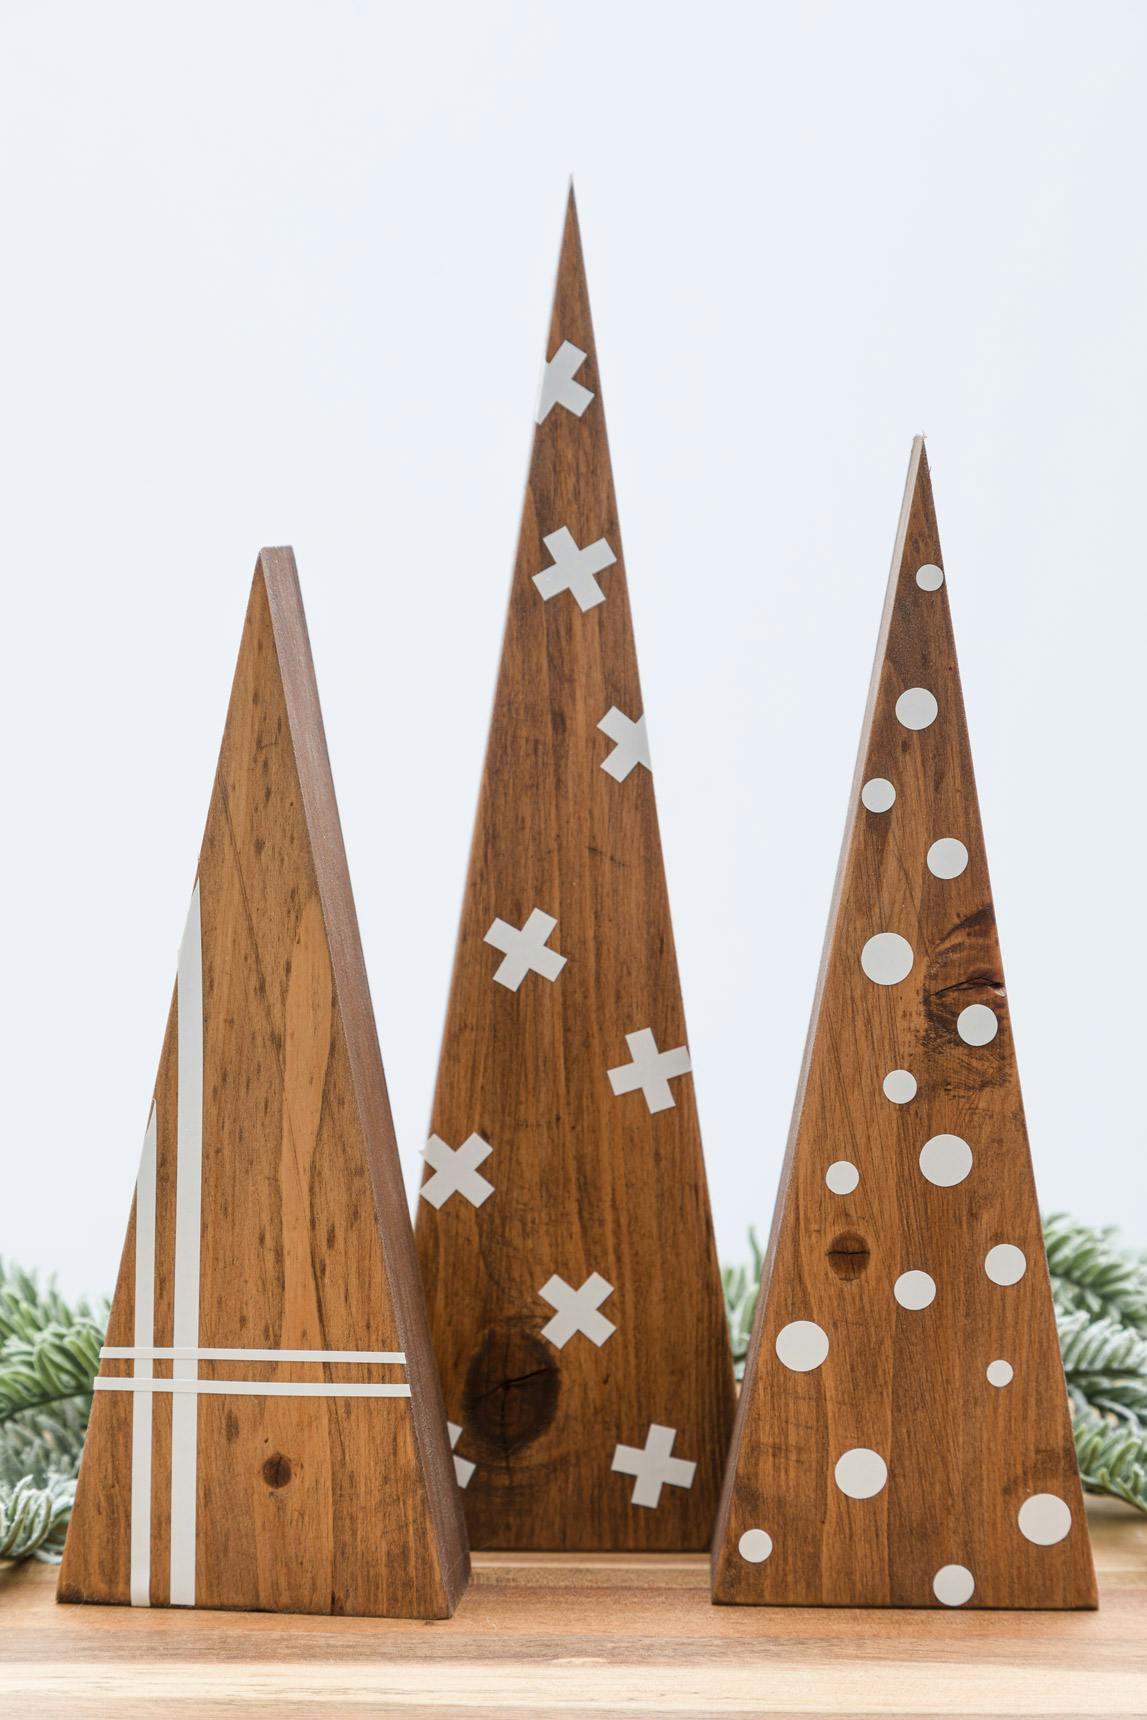 Small Wooden Christmas Tree with Farmhouse Style - DIY Candy